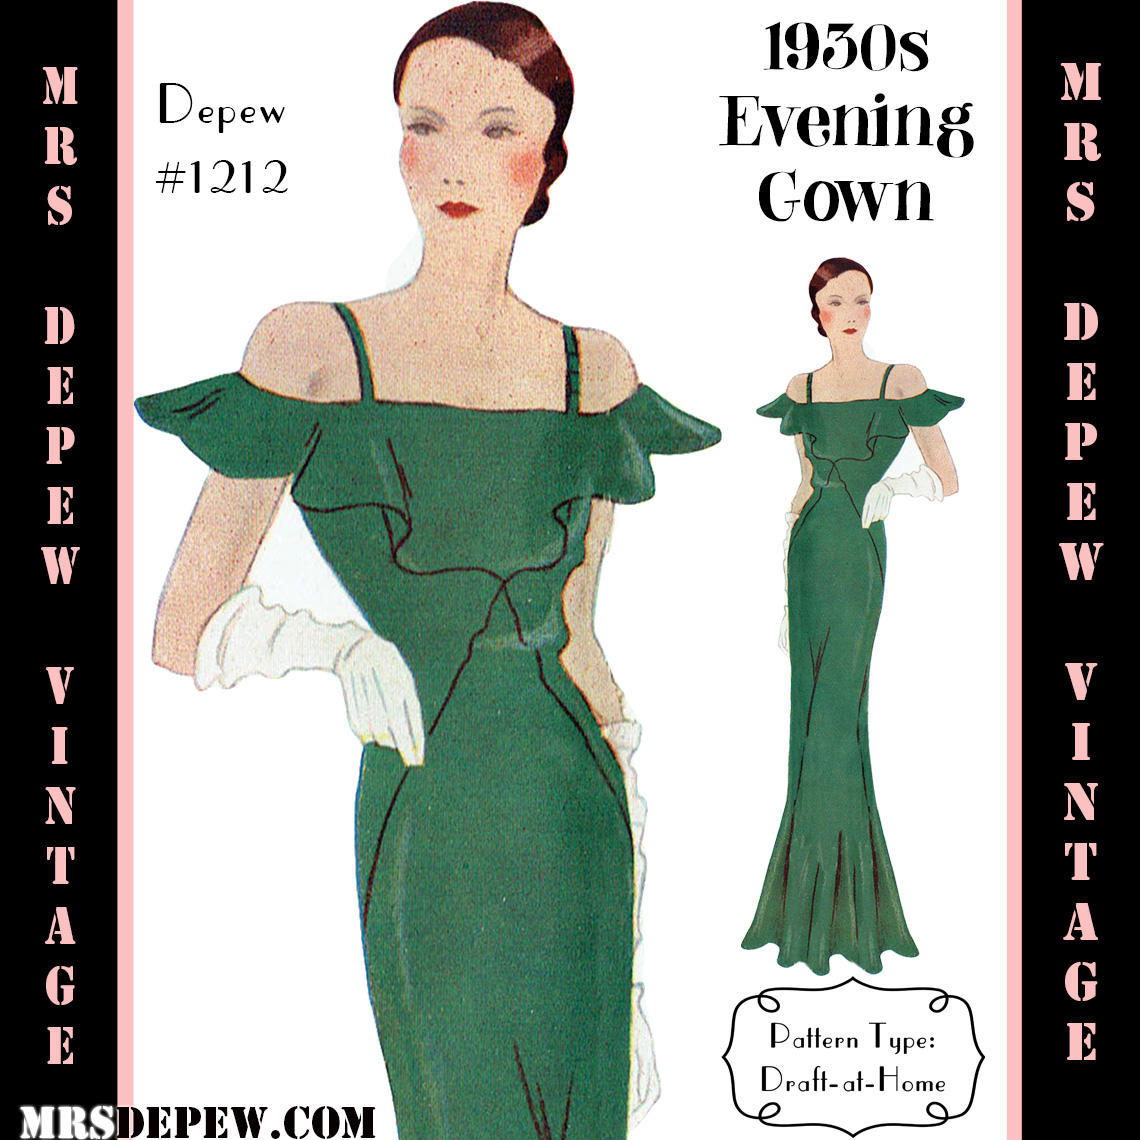 Vintage Sewing Pattern 1930s Evening Gown in Any Size PLUS | Etsy